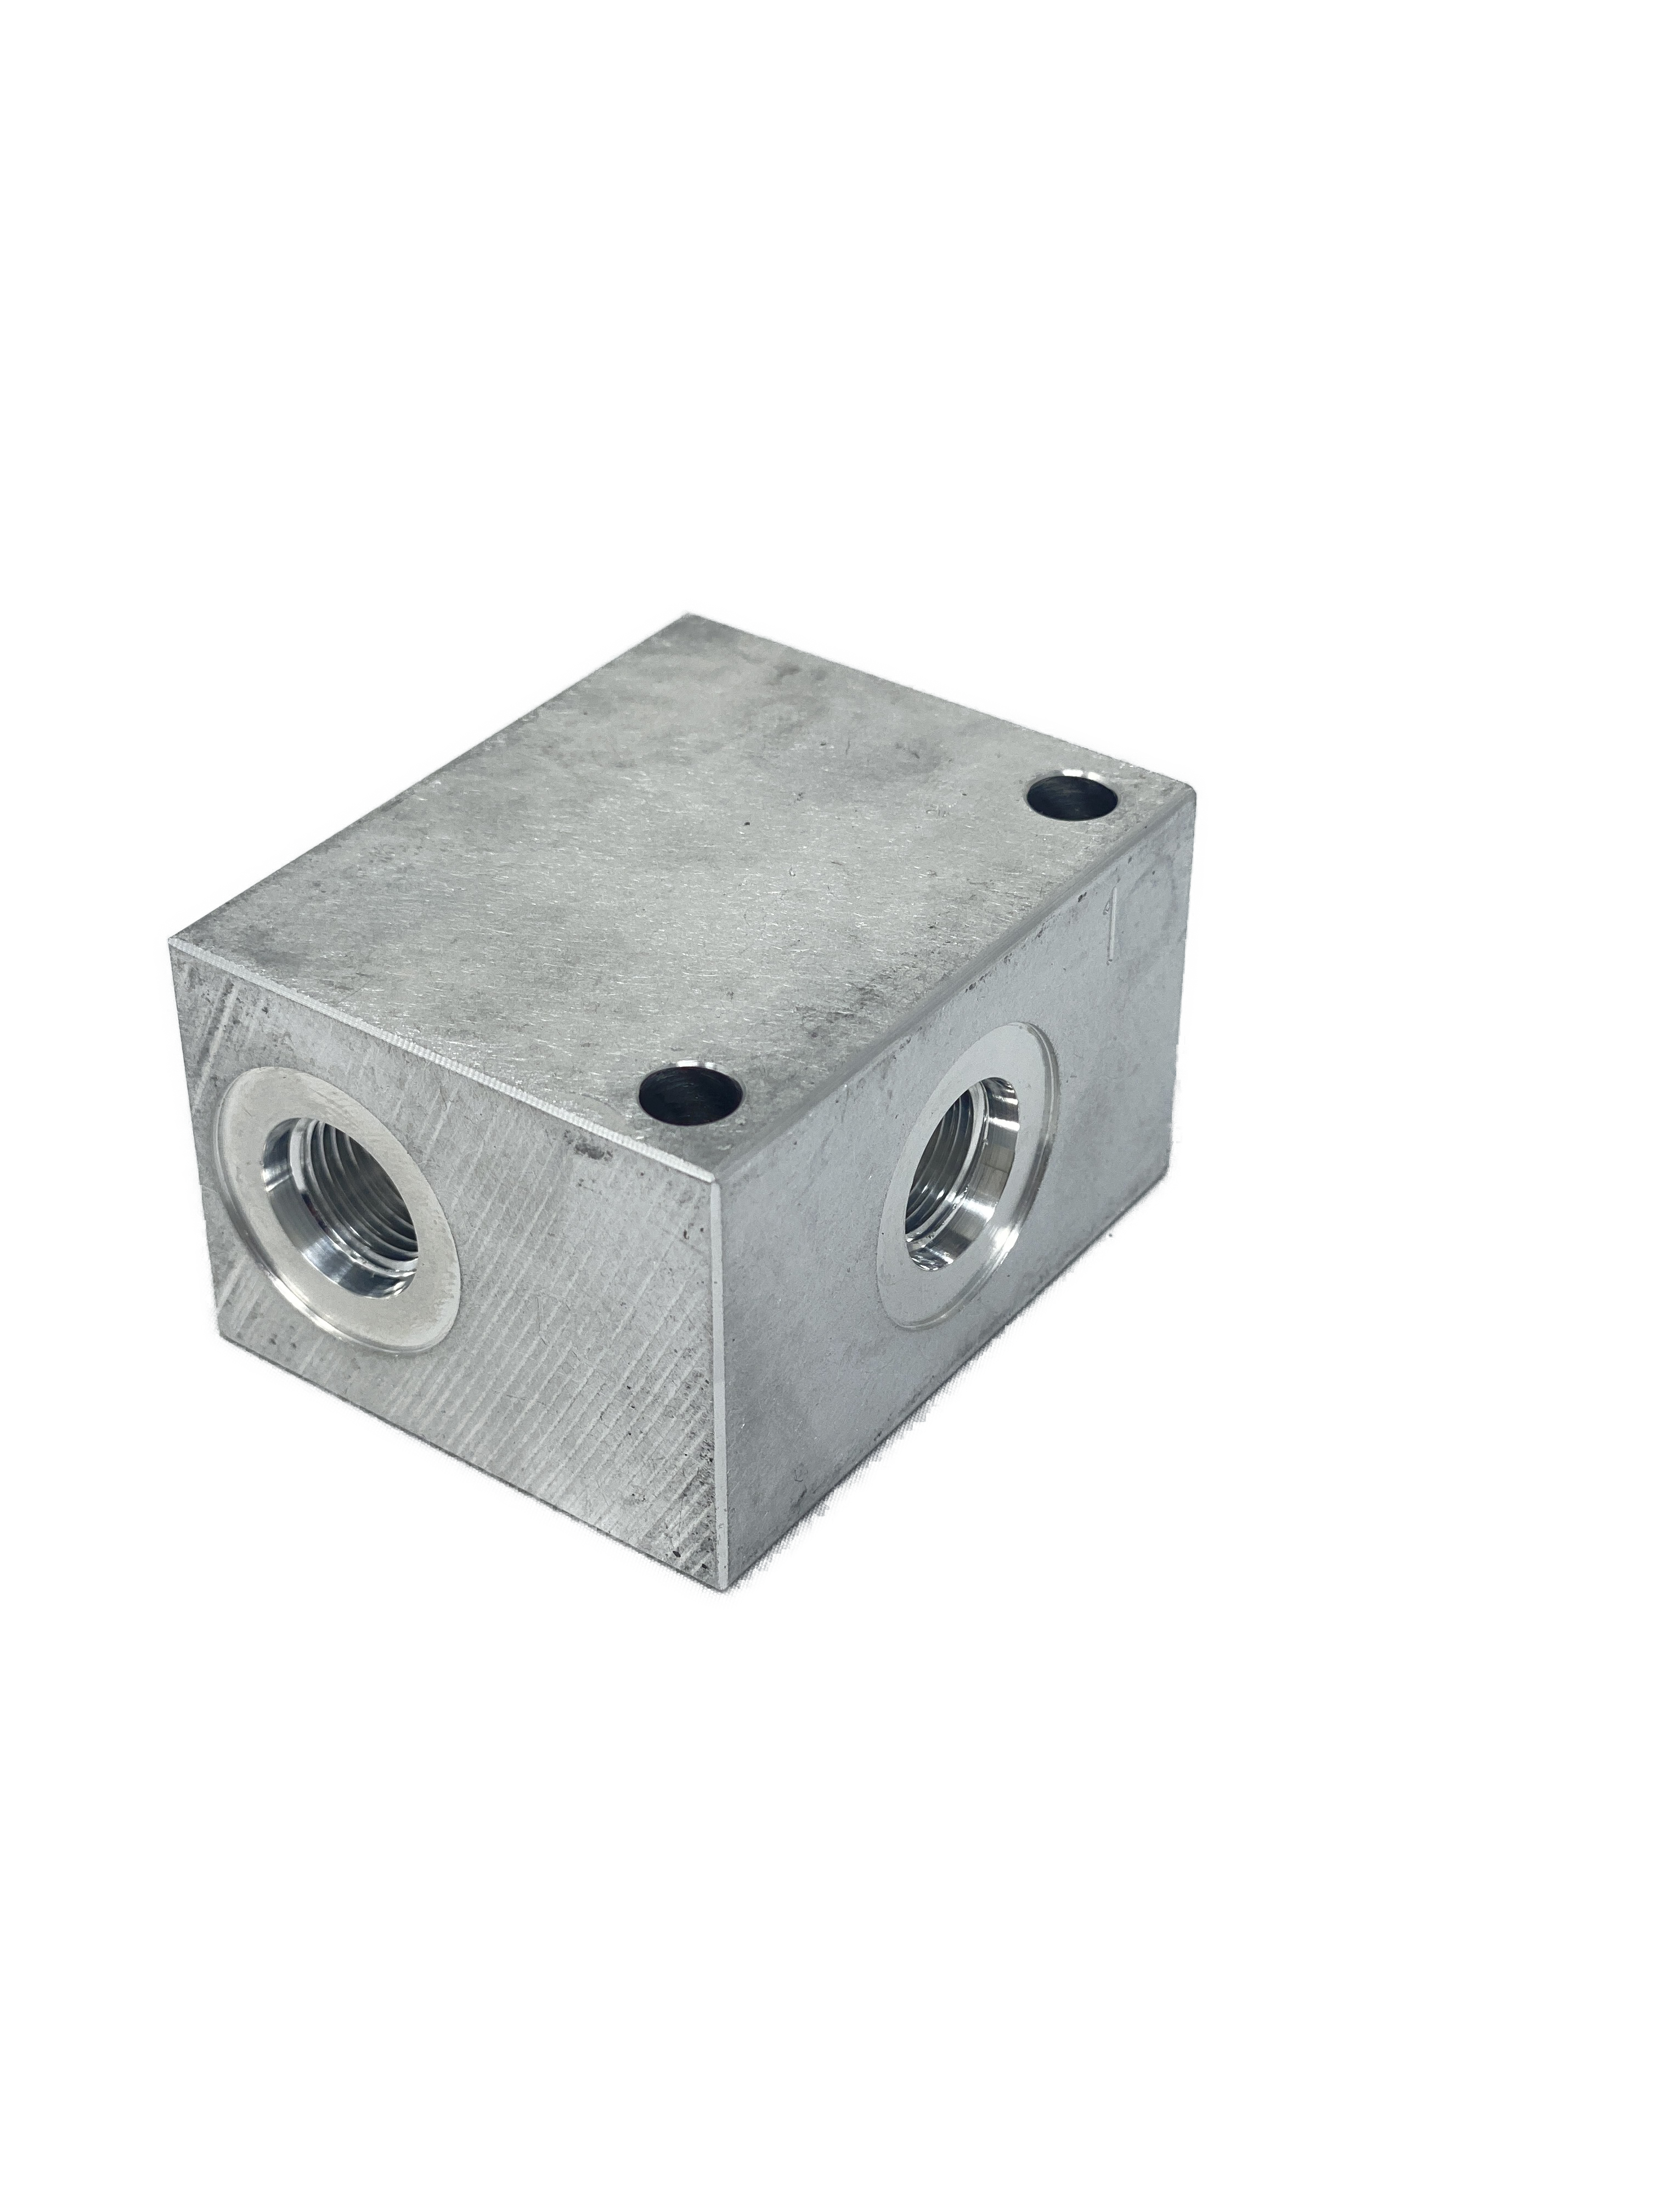 AC082CB4S : Daman Common Cavity Body, C-8-2 Cartridge Cavity, #4 SAE (1/4") Port Connections, 3000psi Rated, Aluminum, Without Gauge Port